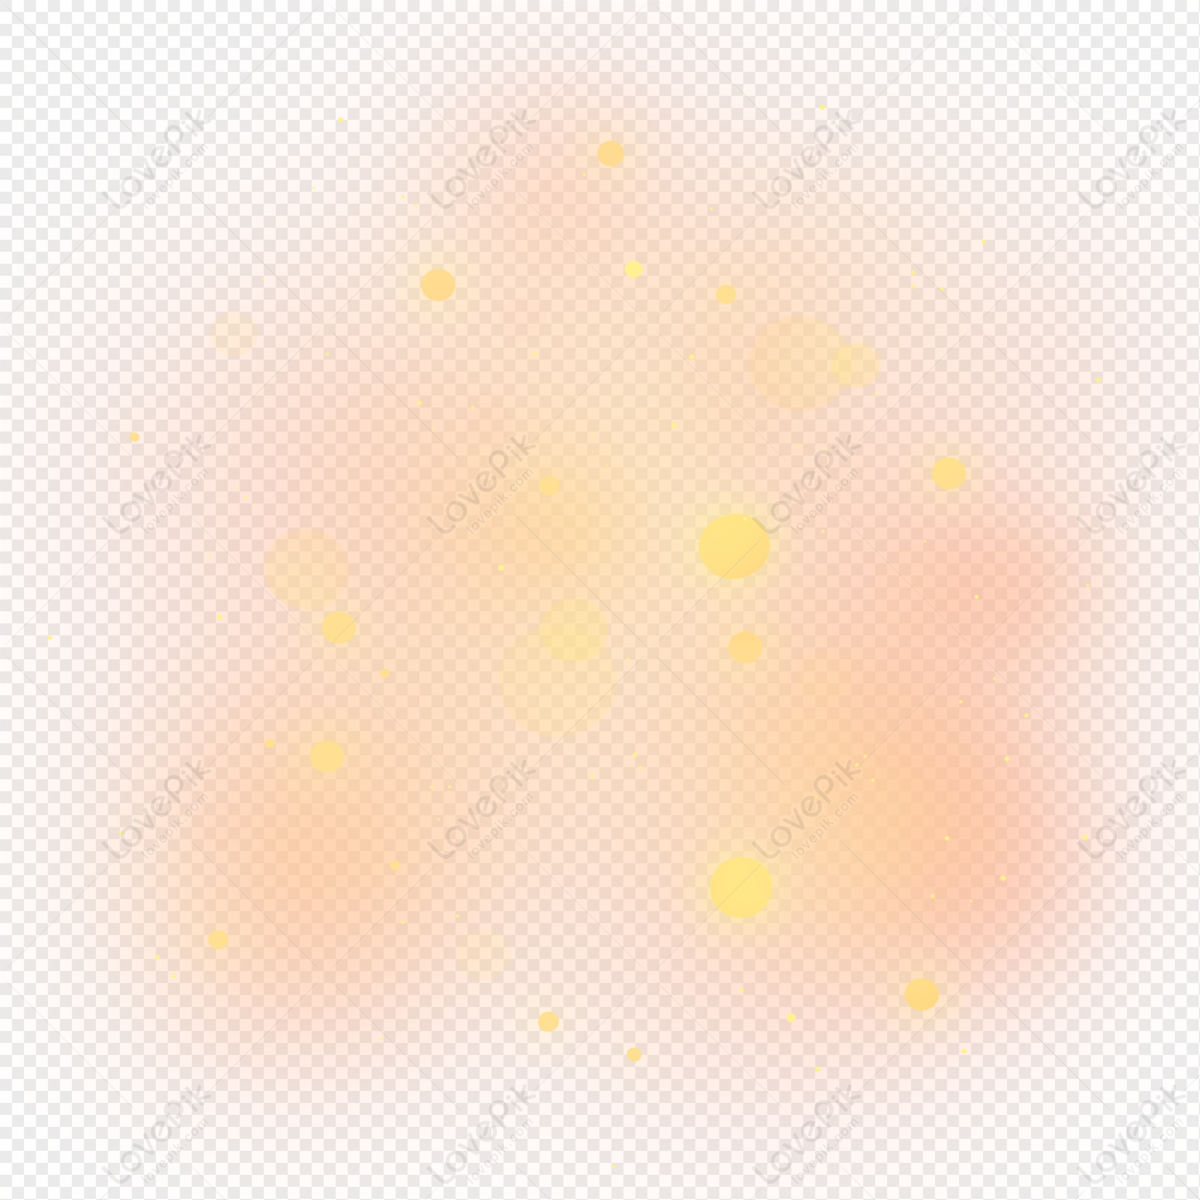 Yellow Glow Effect PNG Picture And Clipart Image For Free Download -  Lovepik | 401362495